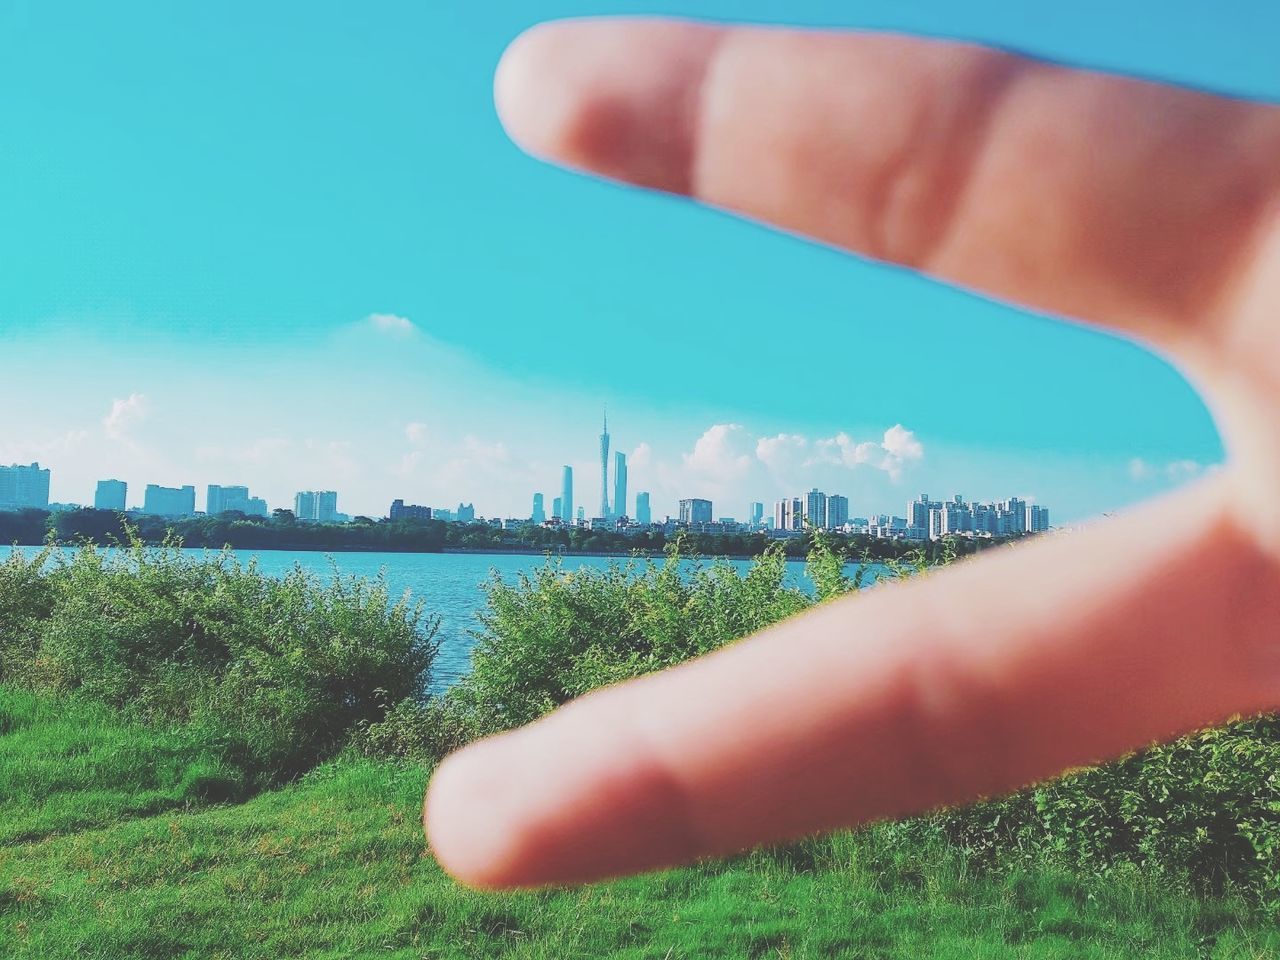 human hand, hand, human body part, one person, sky, building exterior, body part, finger, nature, plant, human finger, real people, built structure, architecture, grass, unrecognizable person, city, day, lifestyles, outdoors, office building exterior, skyscraper